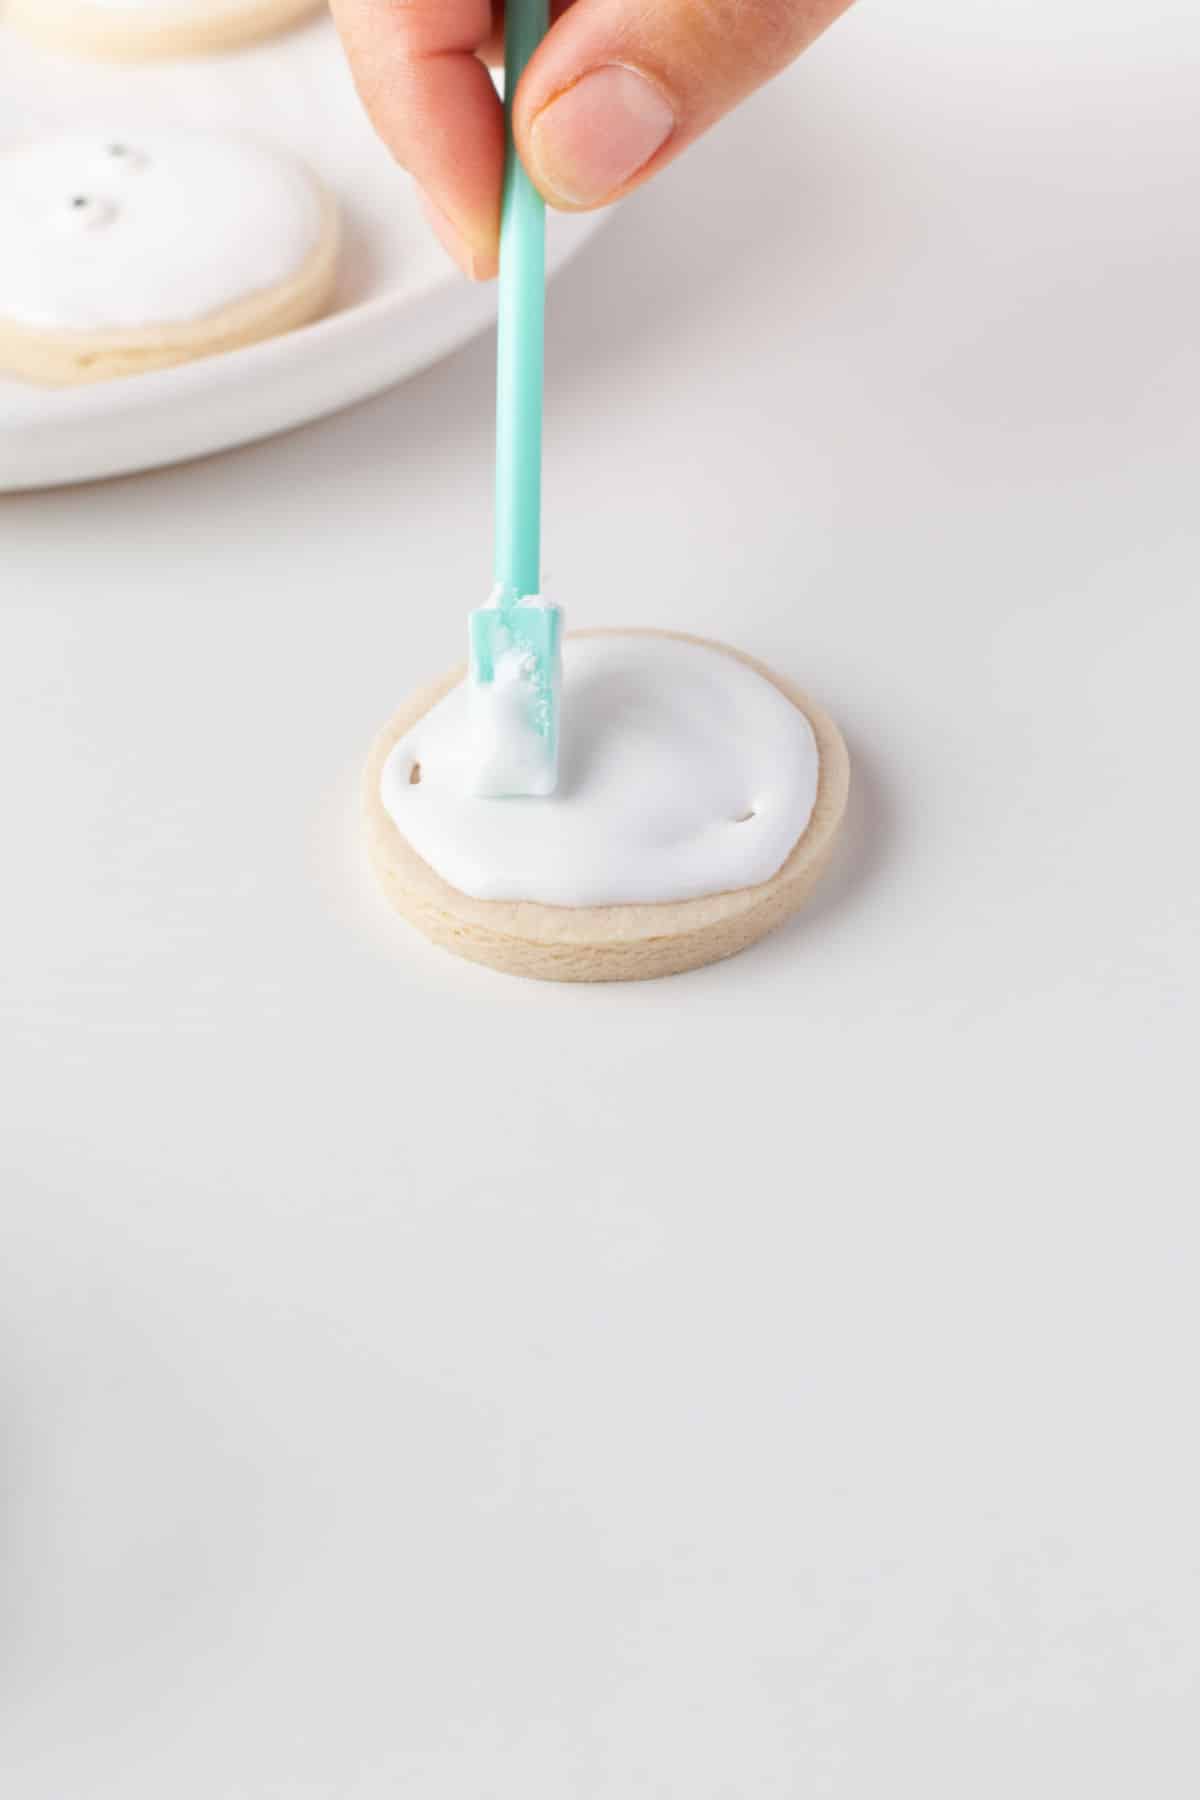 A teal tool smoothing out royal icing on a cookie. 